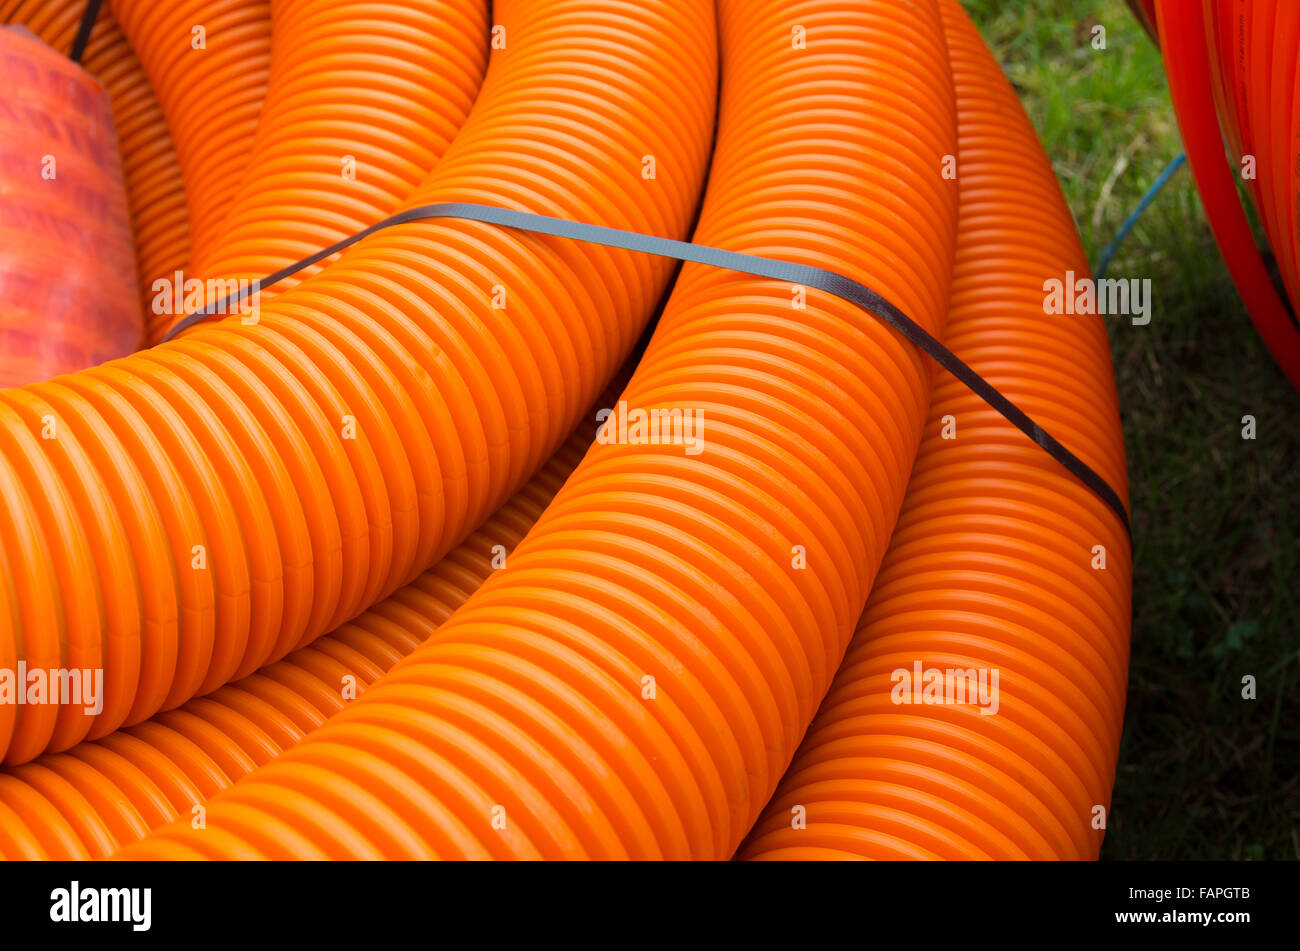 cable hoses for protecting the fiber cables Stock Photo